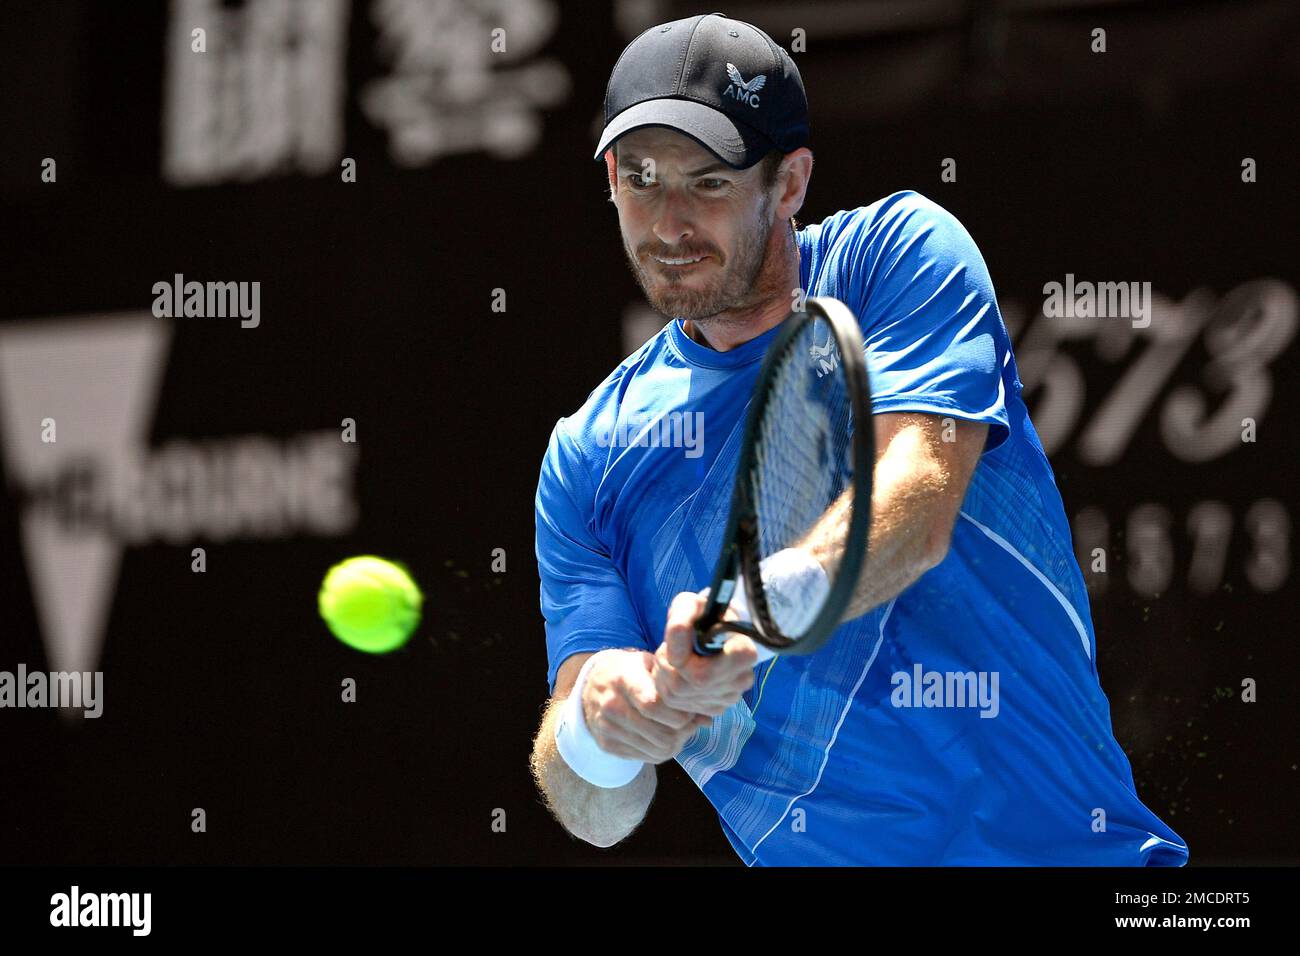 Andy Murray of Britain plays a backhand return to Nikoloz Basilashvili of Georgia during their first round match at the Australian Open tennis championships in Melbourne, Australia, Tuesday, Jan